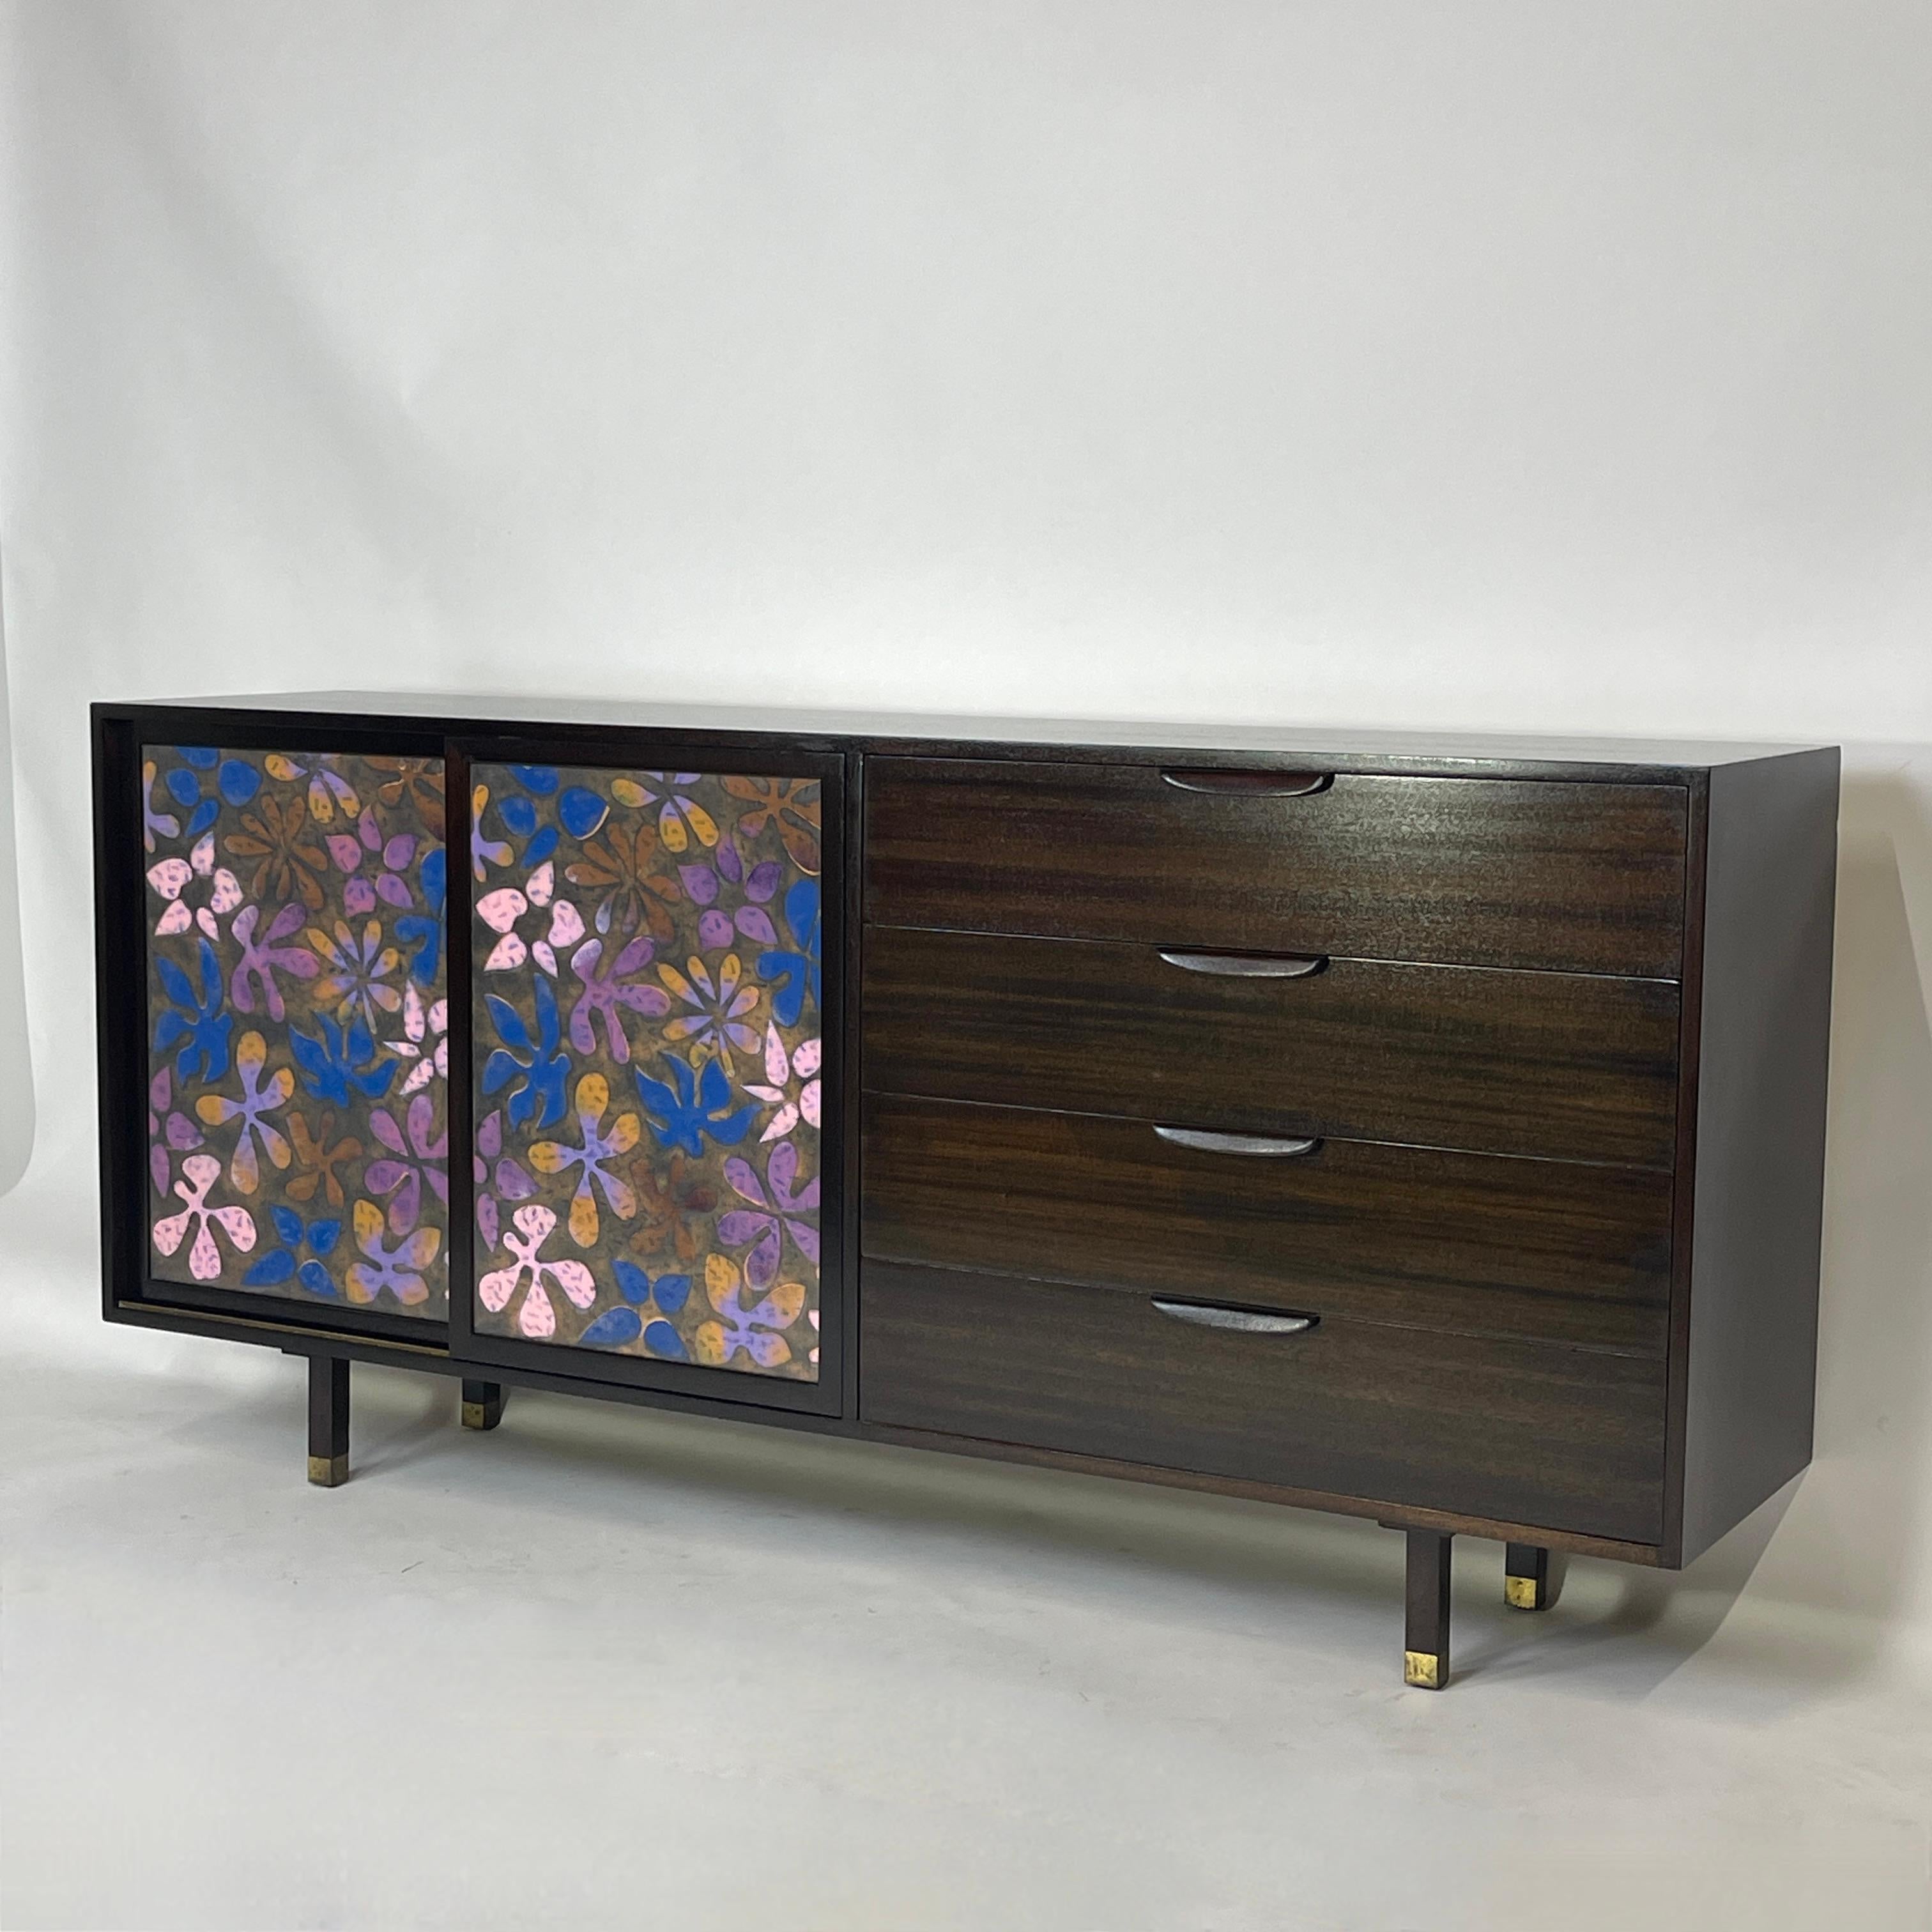 Stunning and rare collaboration between Harvey Probber and Arpad Rosti. This piece has been completely refinished to perfection including the matte white drawer fronts of the interior. 
This grand and stunning Harvey Probber design is elevated with